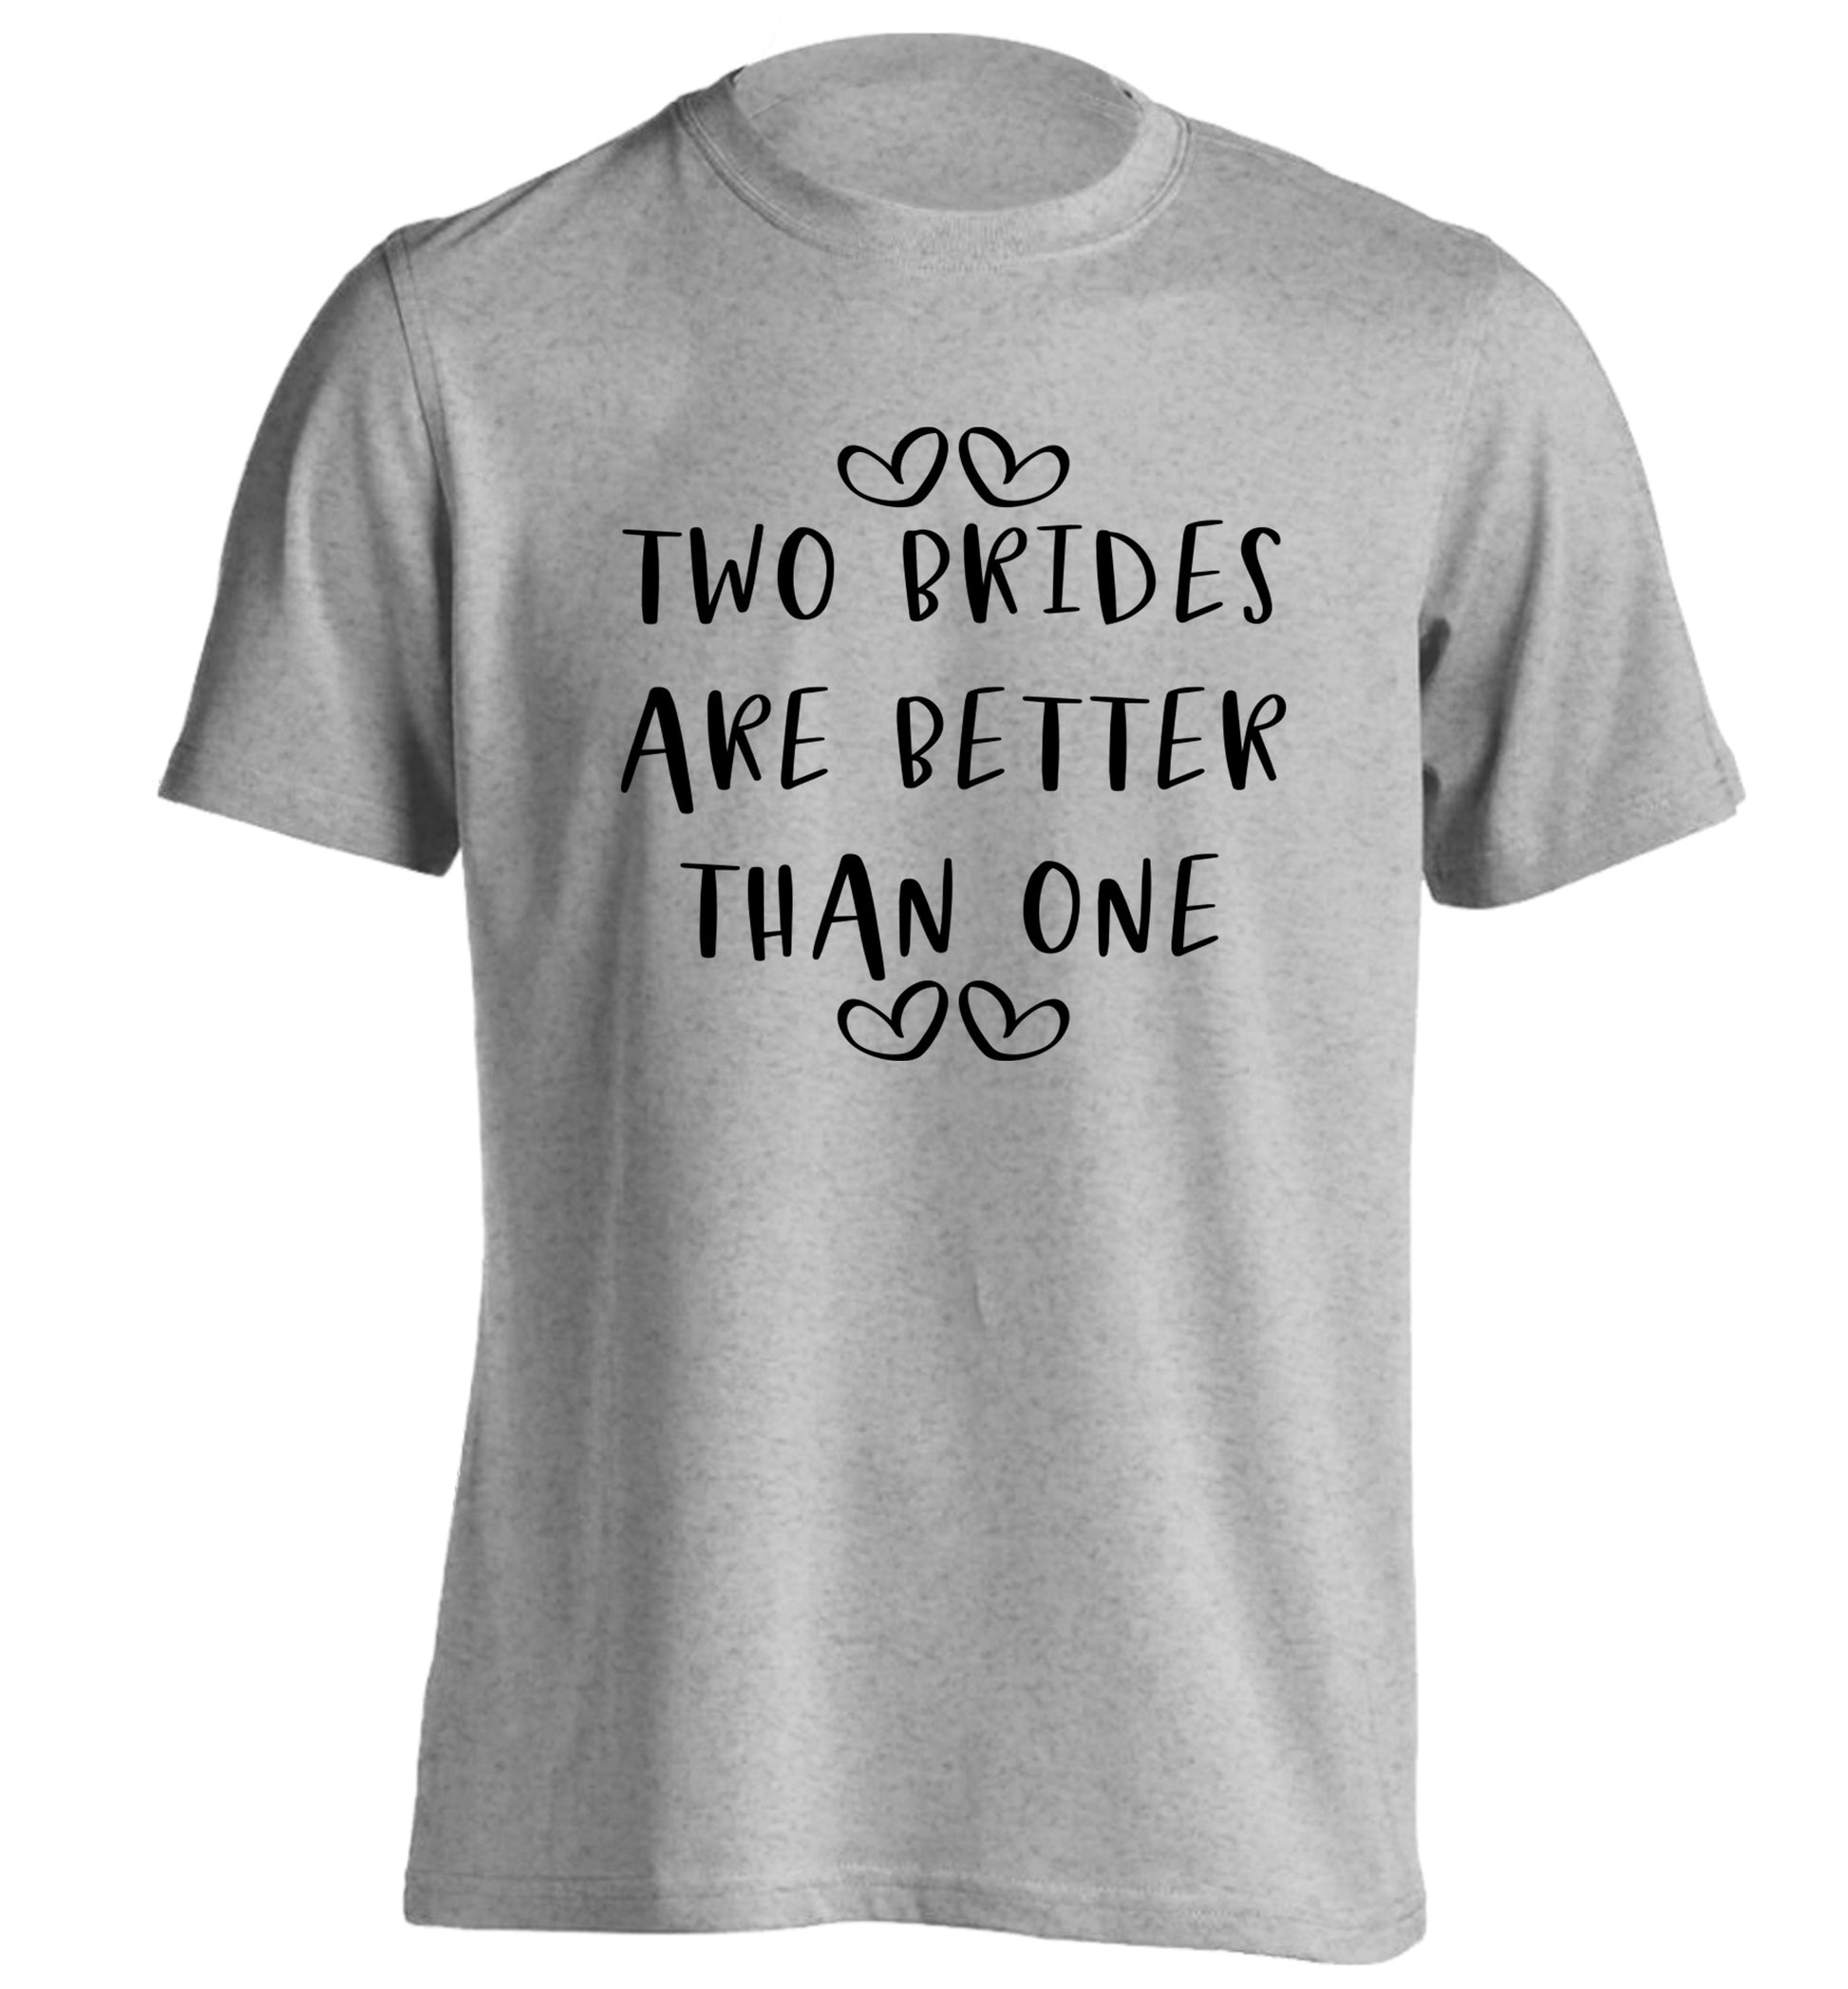 Two brides are better than one adults unisex grey Tshirt 2XL